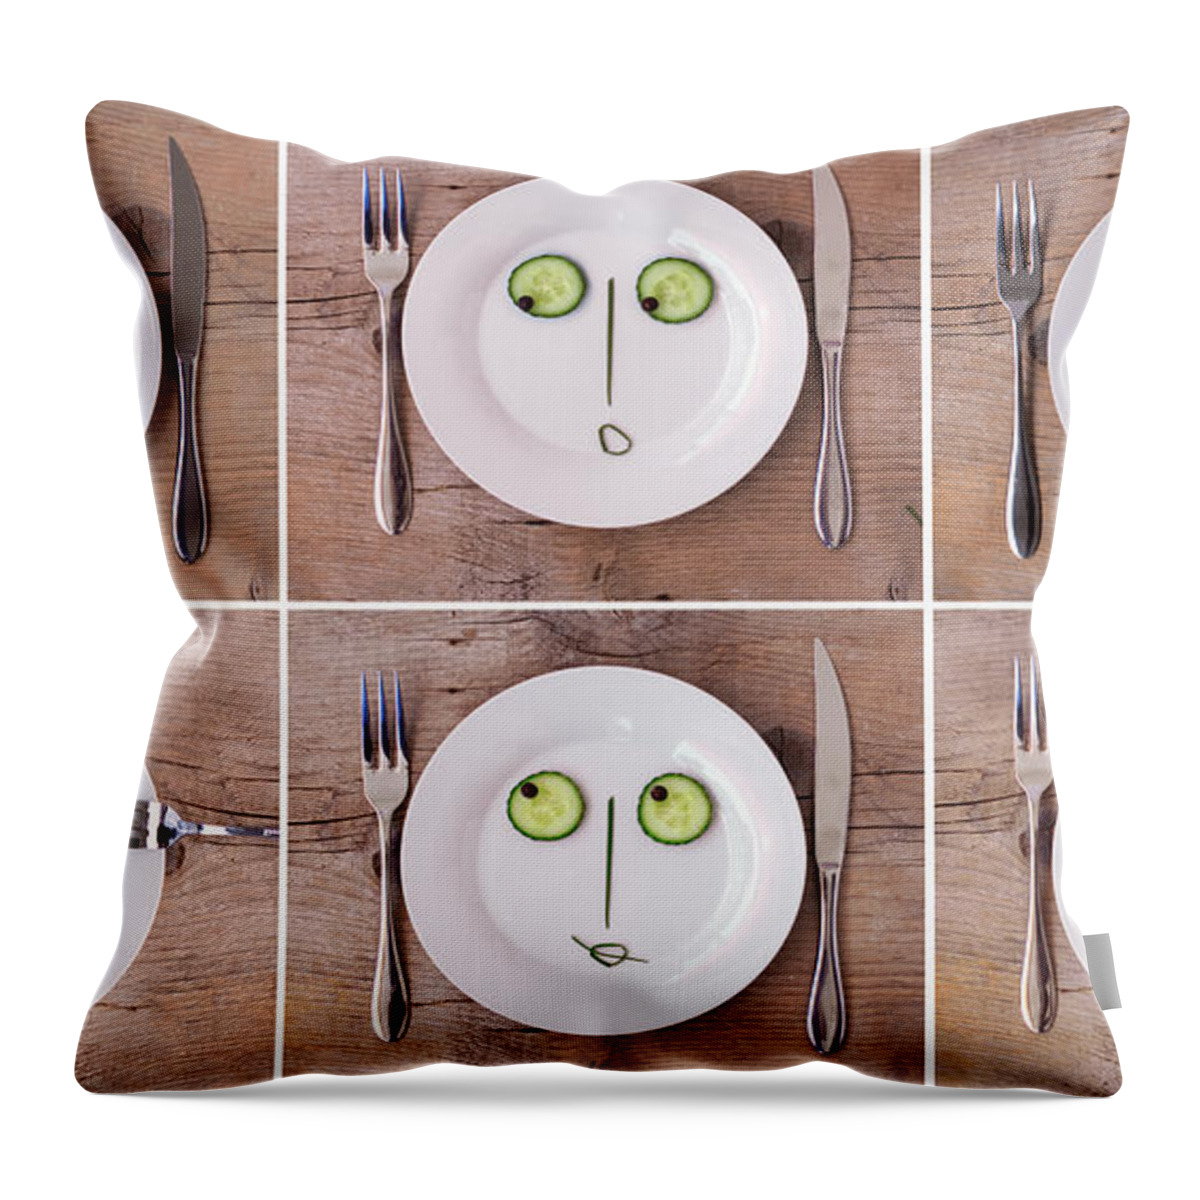 Vegetable Throw Pillow featuring the photograph Vegetable Faces by Nailia Schwarz